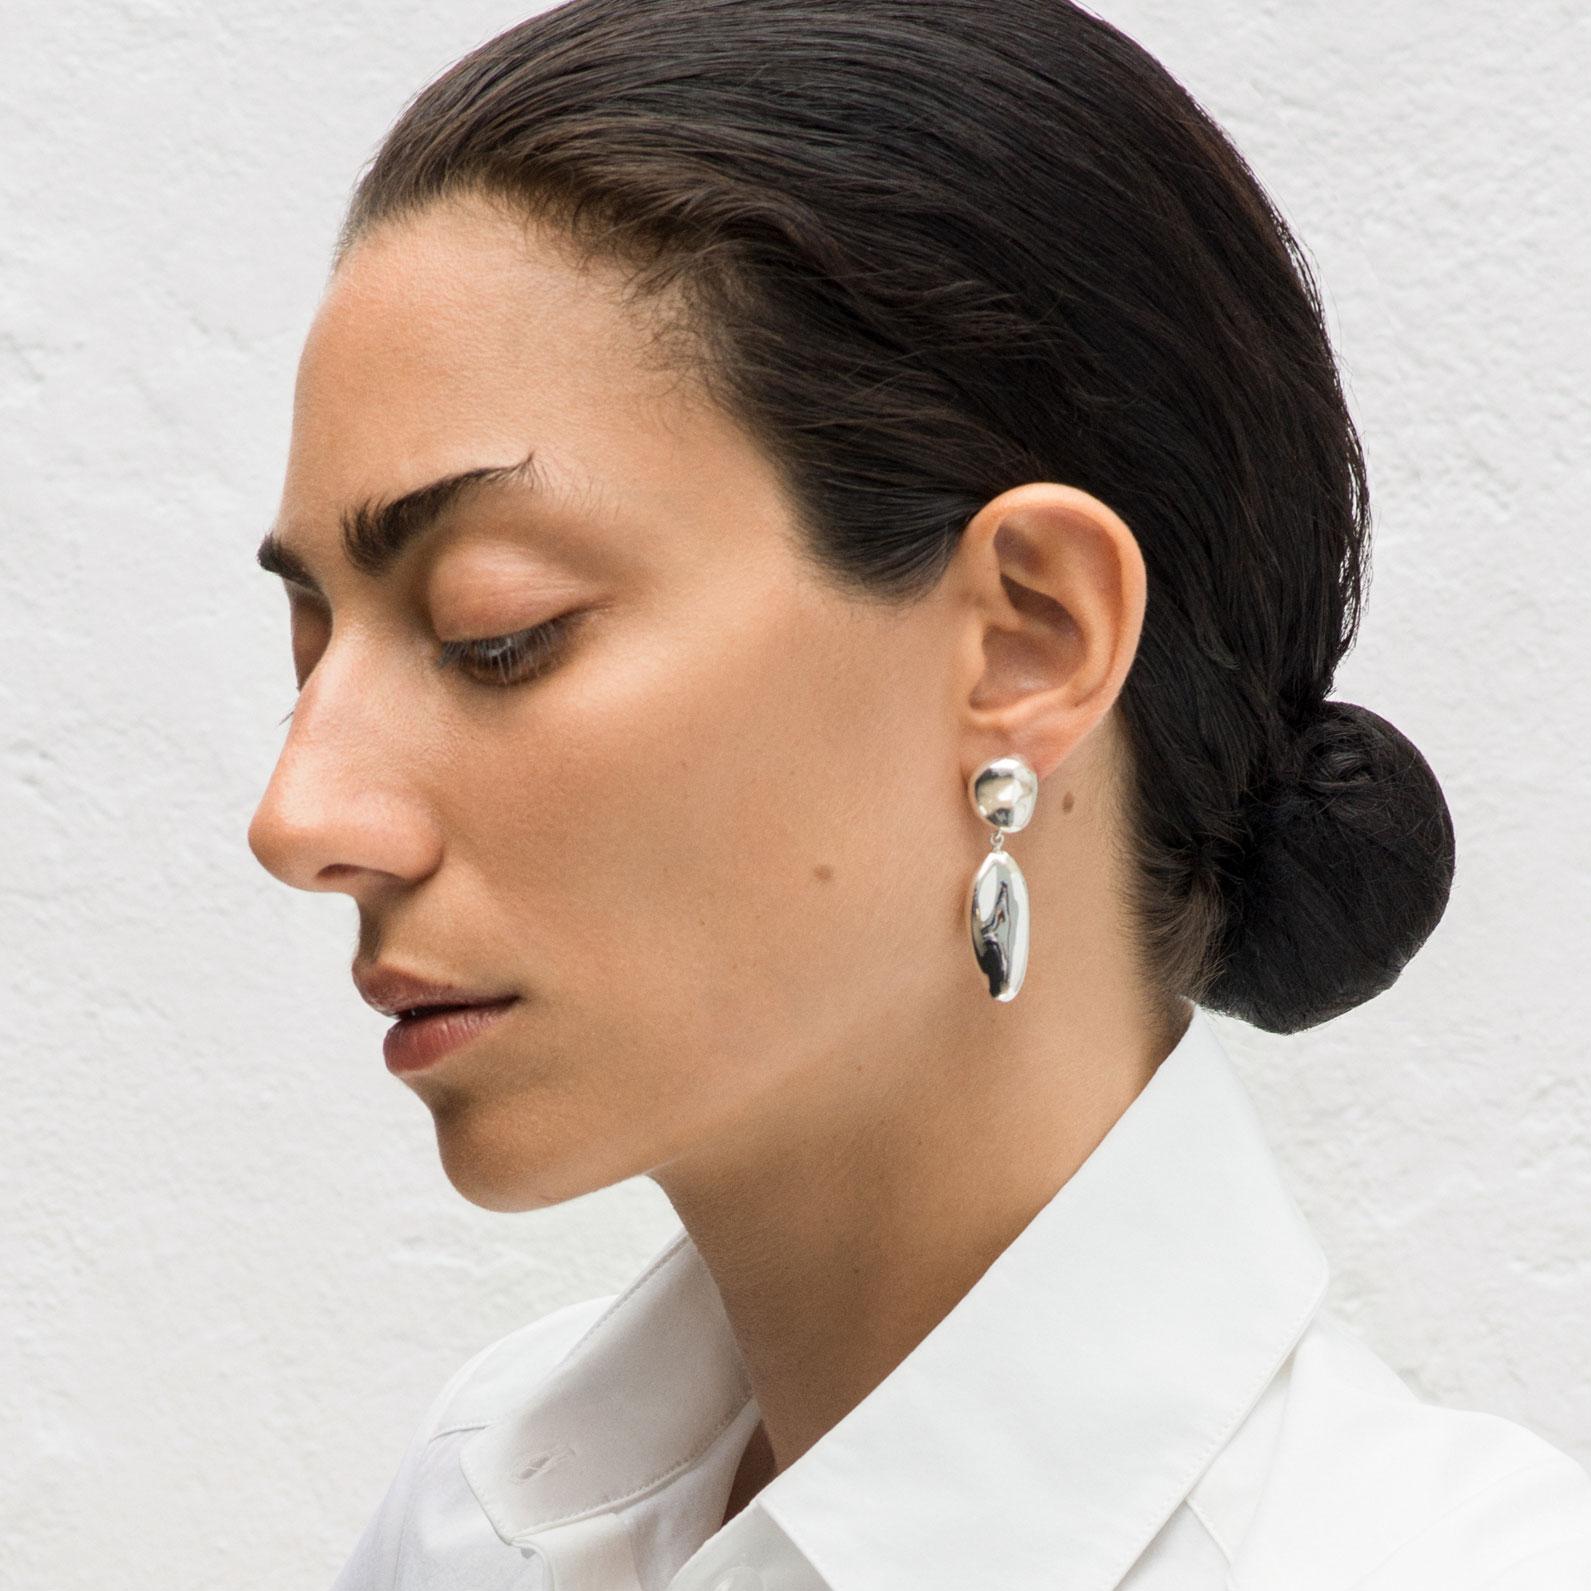 AGMES Sterling Silver Sculptural Drop Earrings.
Sterling Silver post.
Also available in Gold Vermeil.  Kindly contact us if interested.
Handmade in New York City.
Inspired by urban landscapes, architecture and modern art, the collection creates a